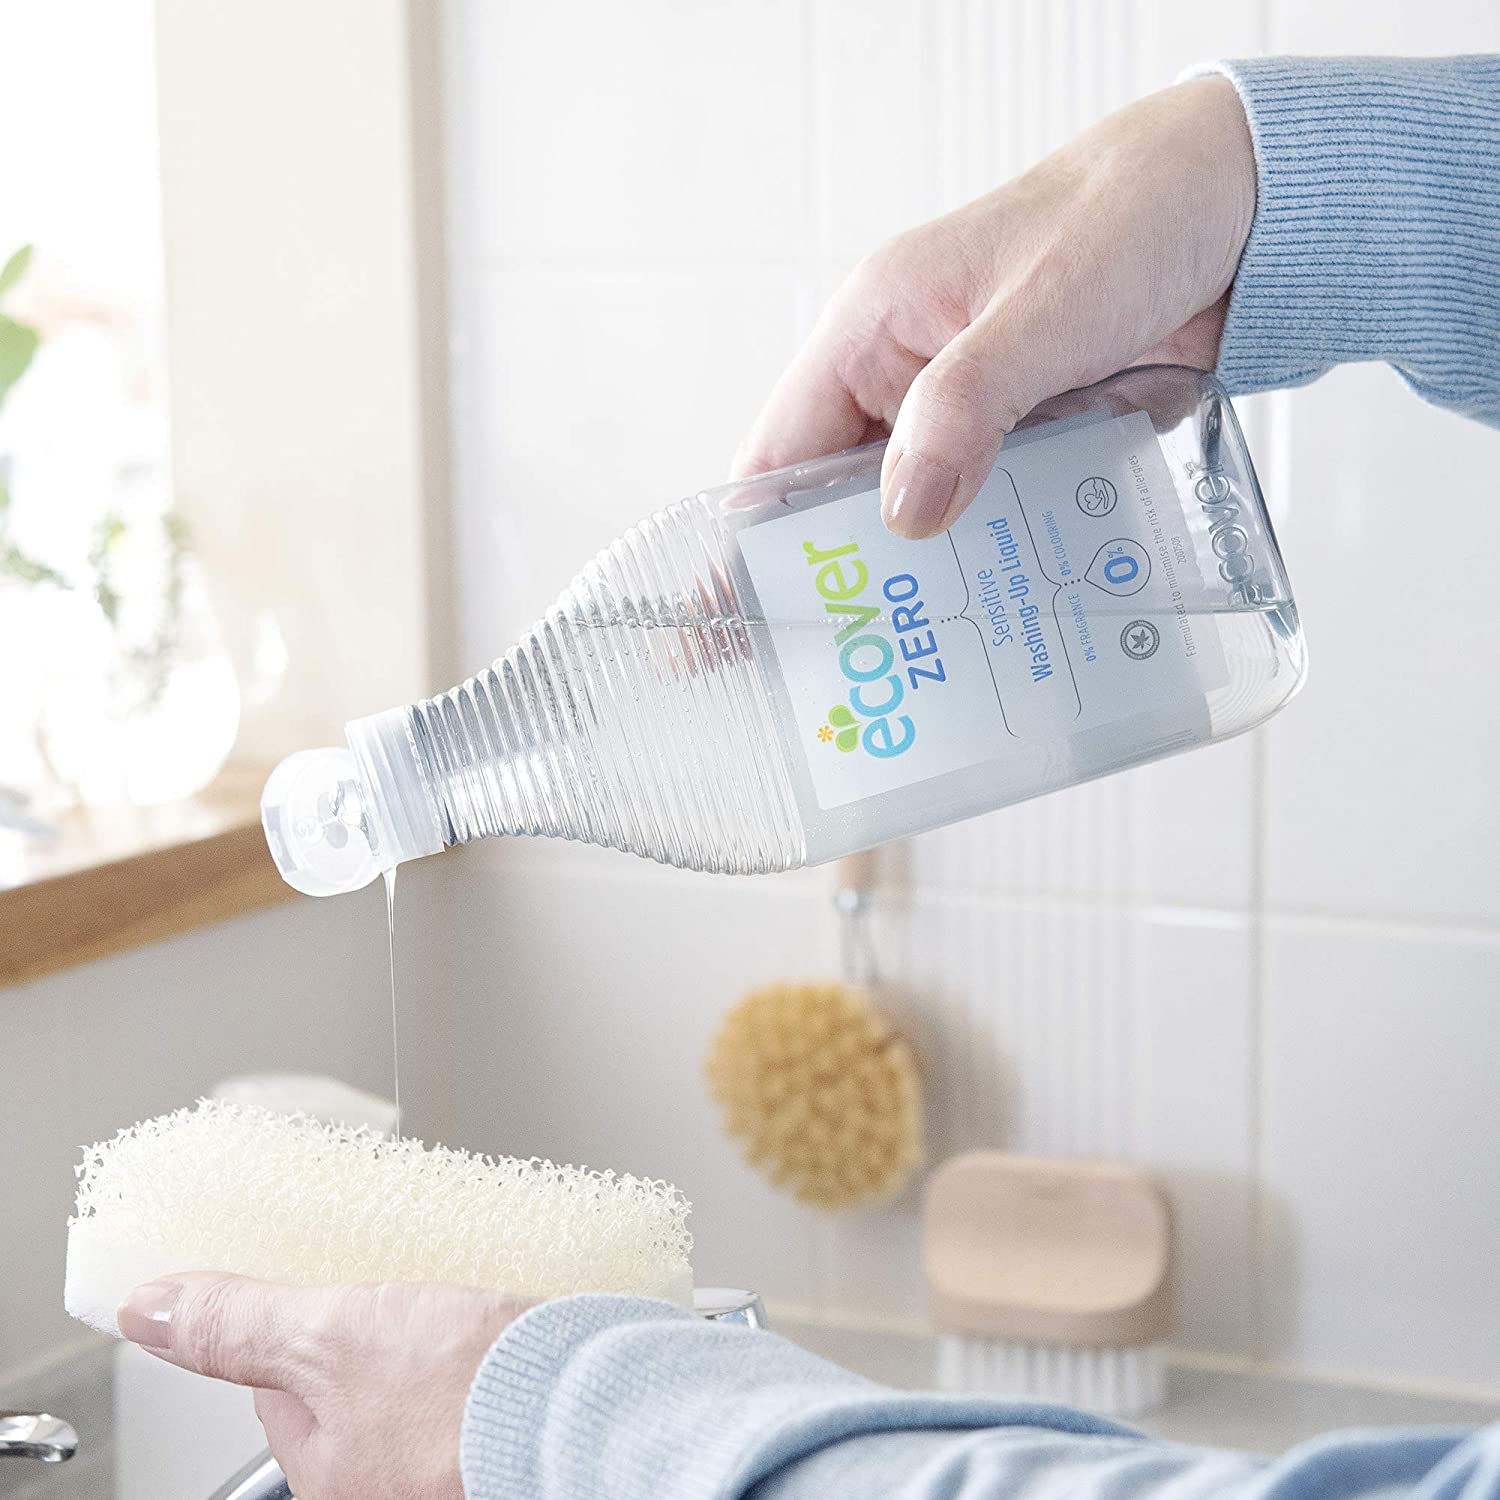 best eco-friendly cleaning products - ecover zero washing up liquid